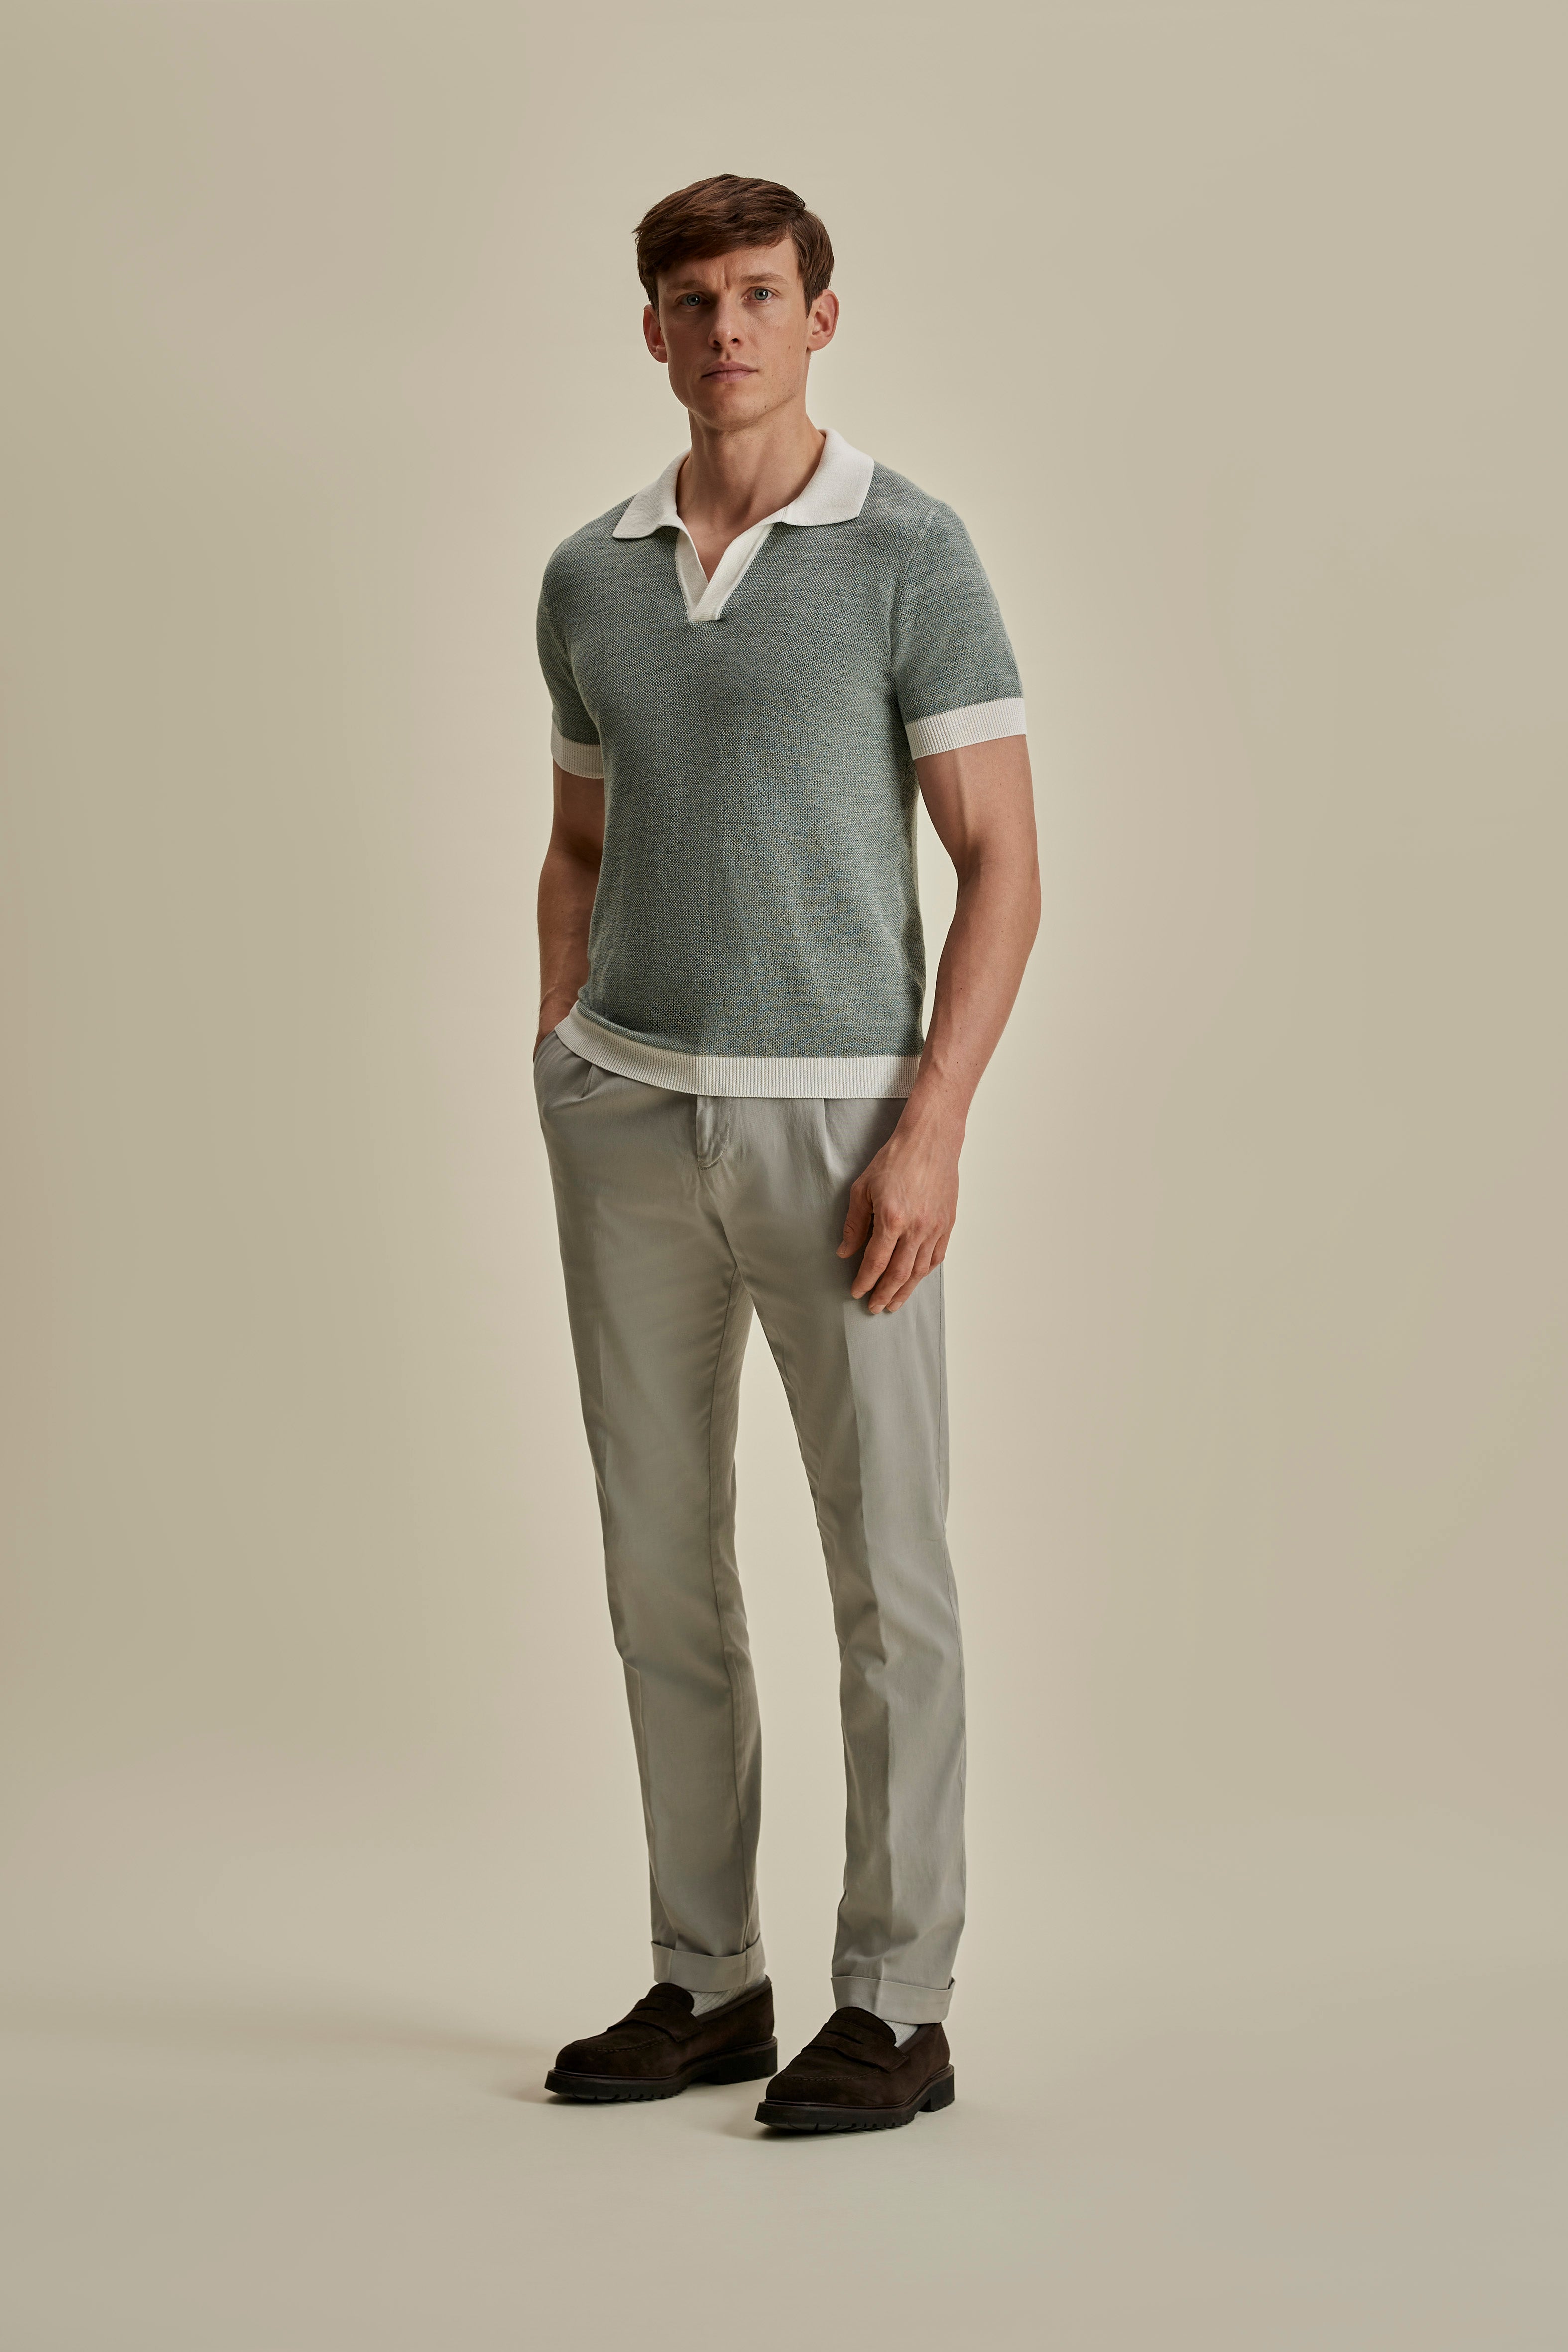 Cotton Linen Contrast Knitted Polo Shirt Mid Green Full Length Model Image